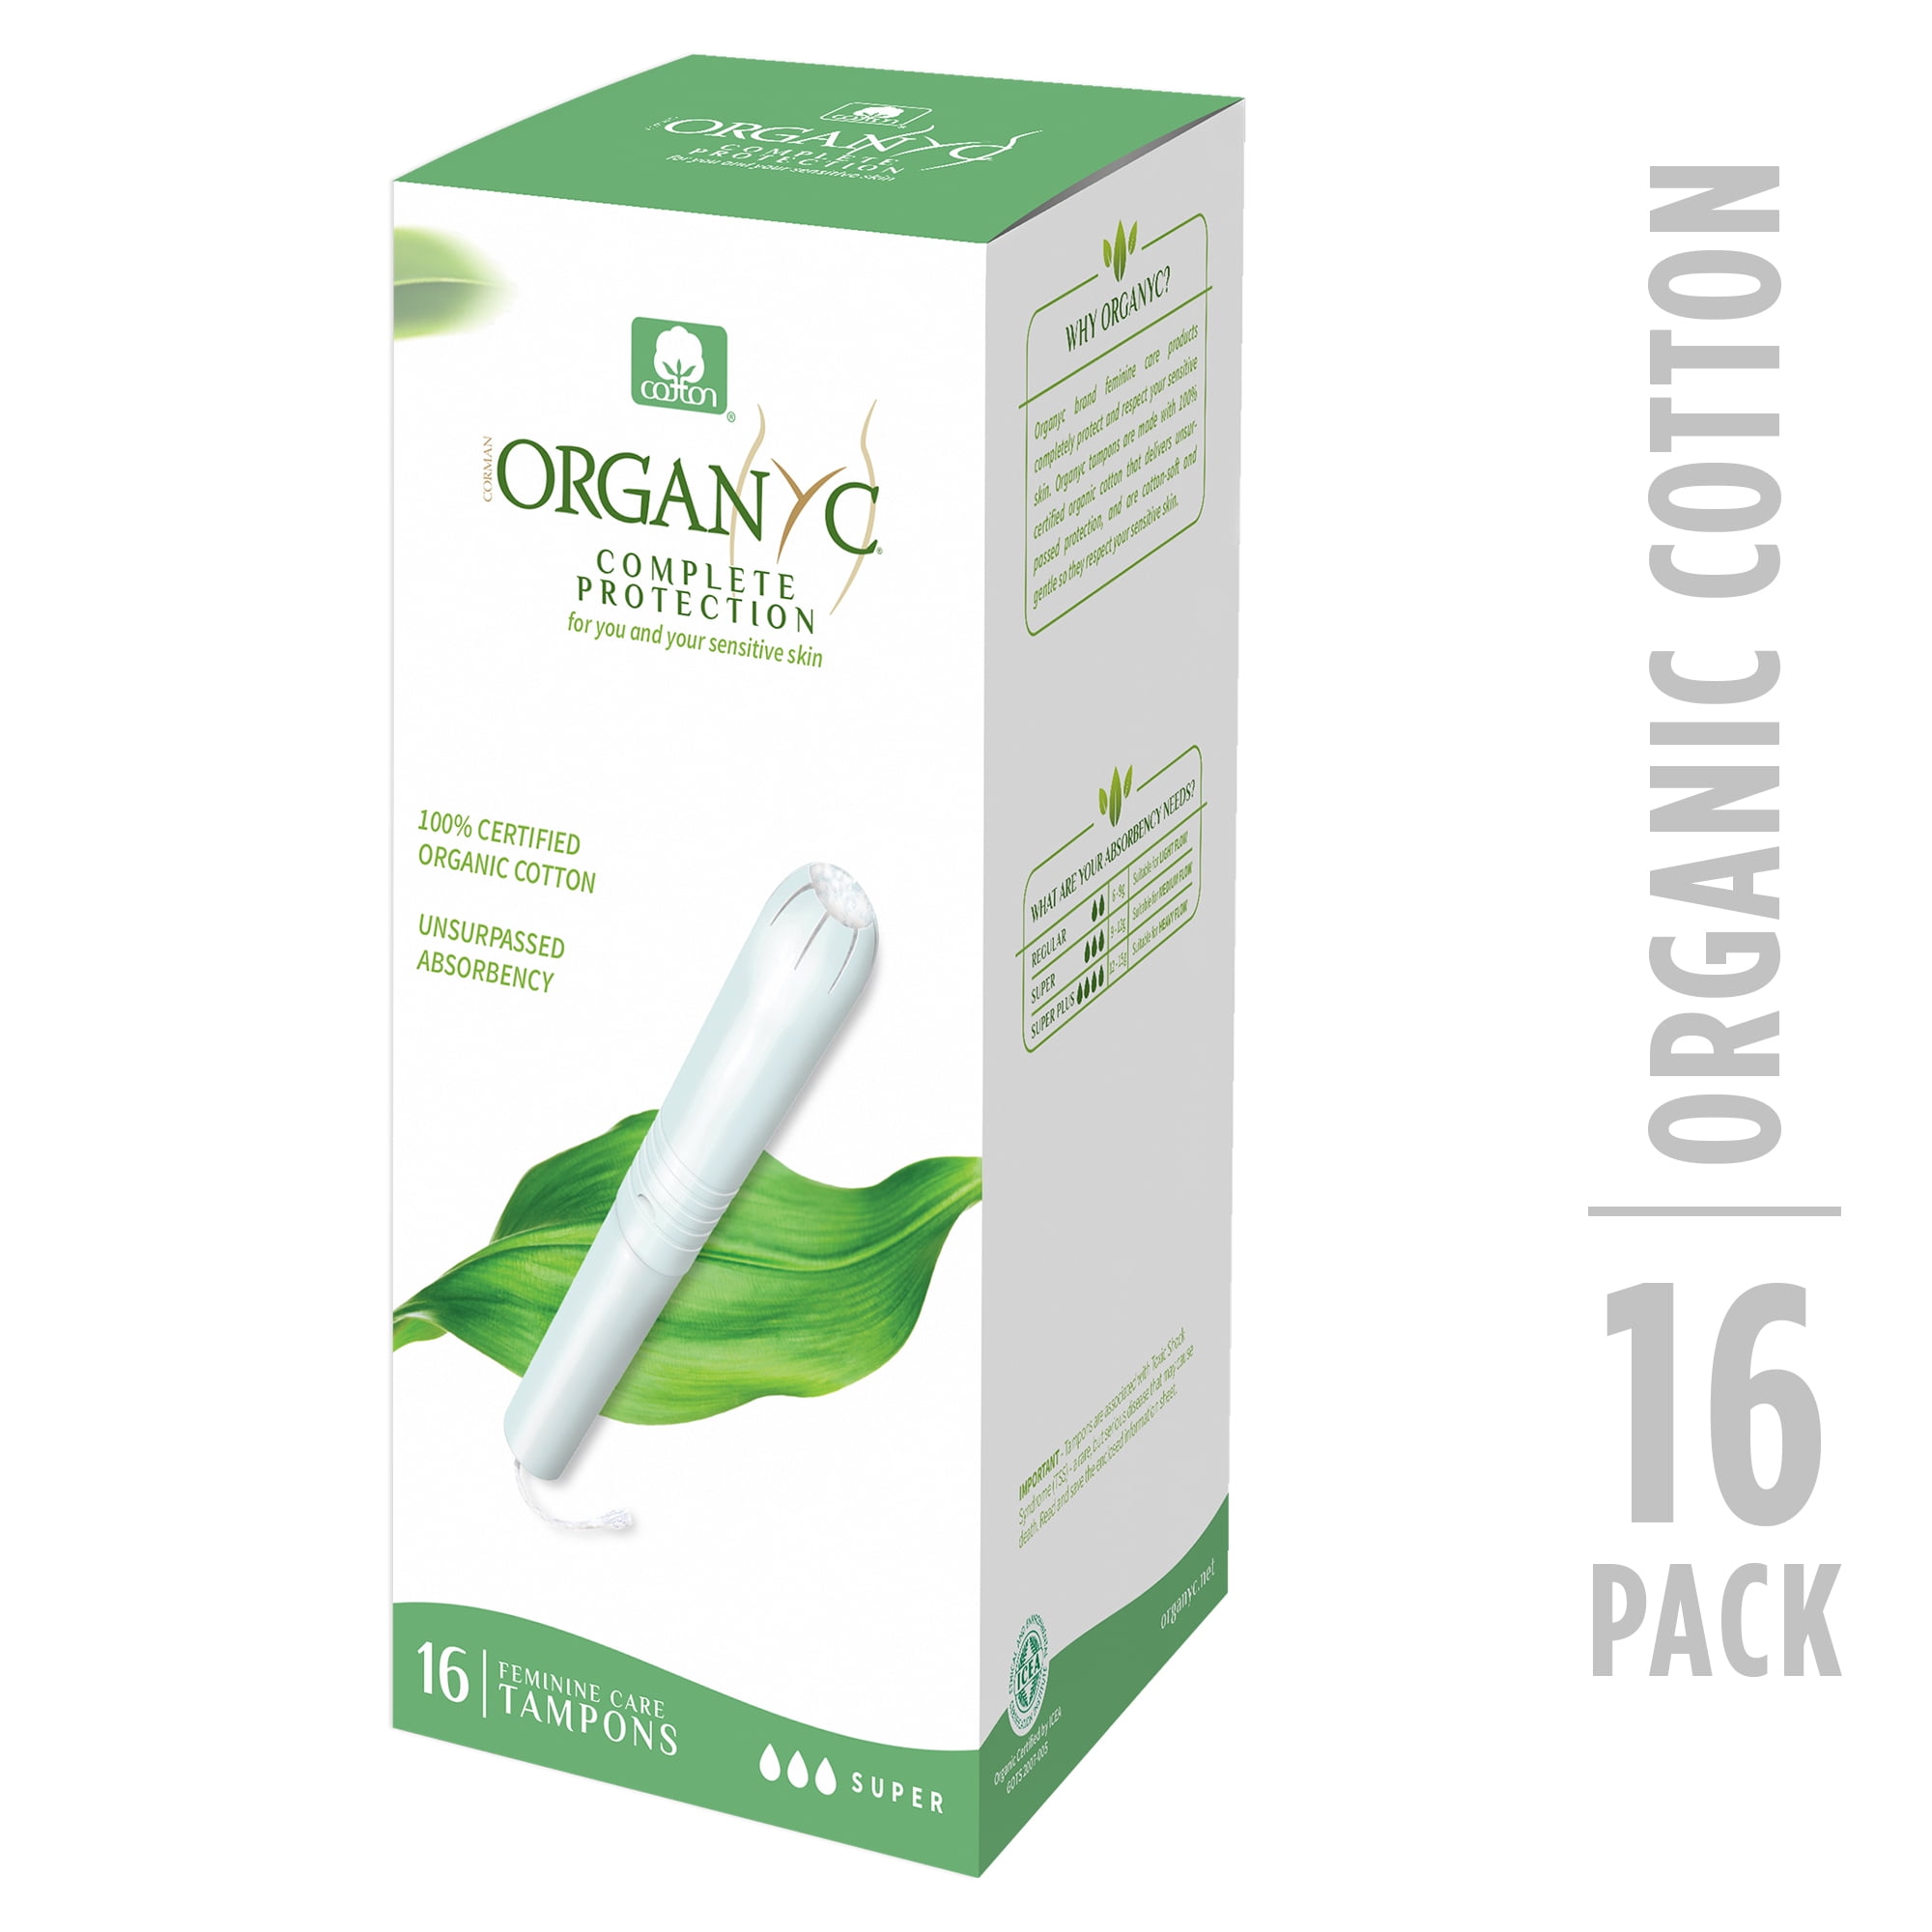 Organyc Certified Organic Cotton Tampons with Organic-Based Compact Super Ct - Walmart.com